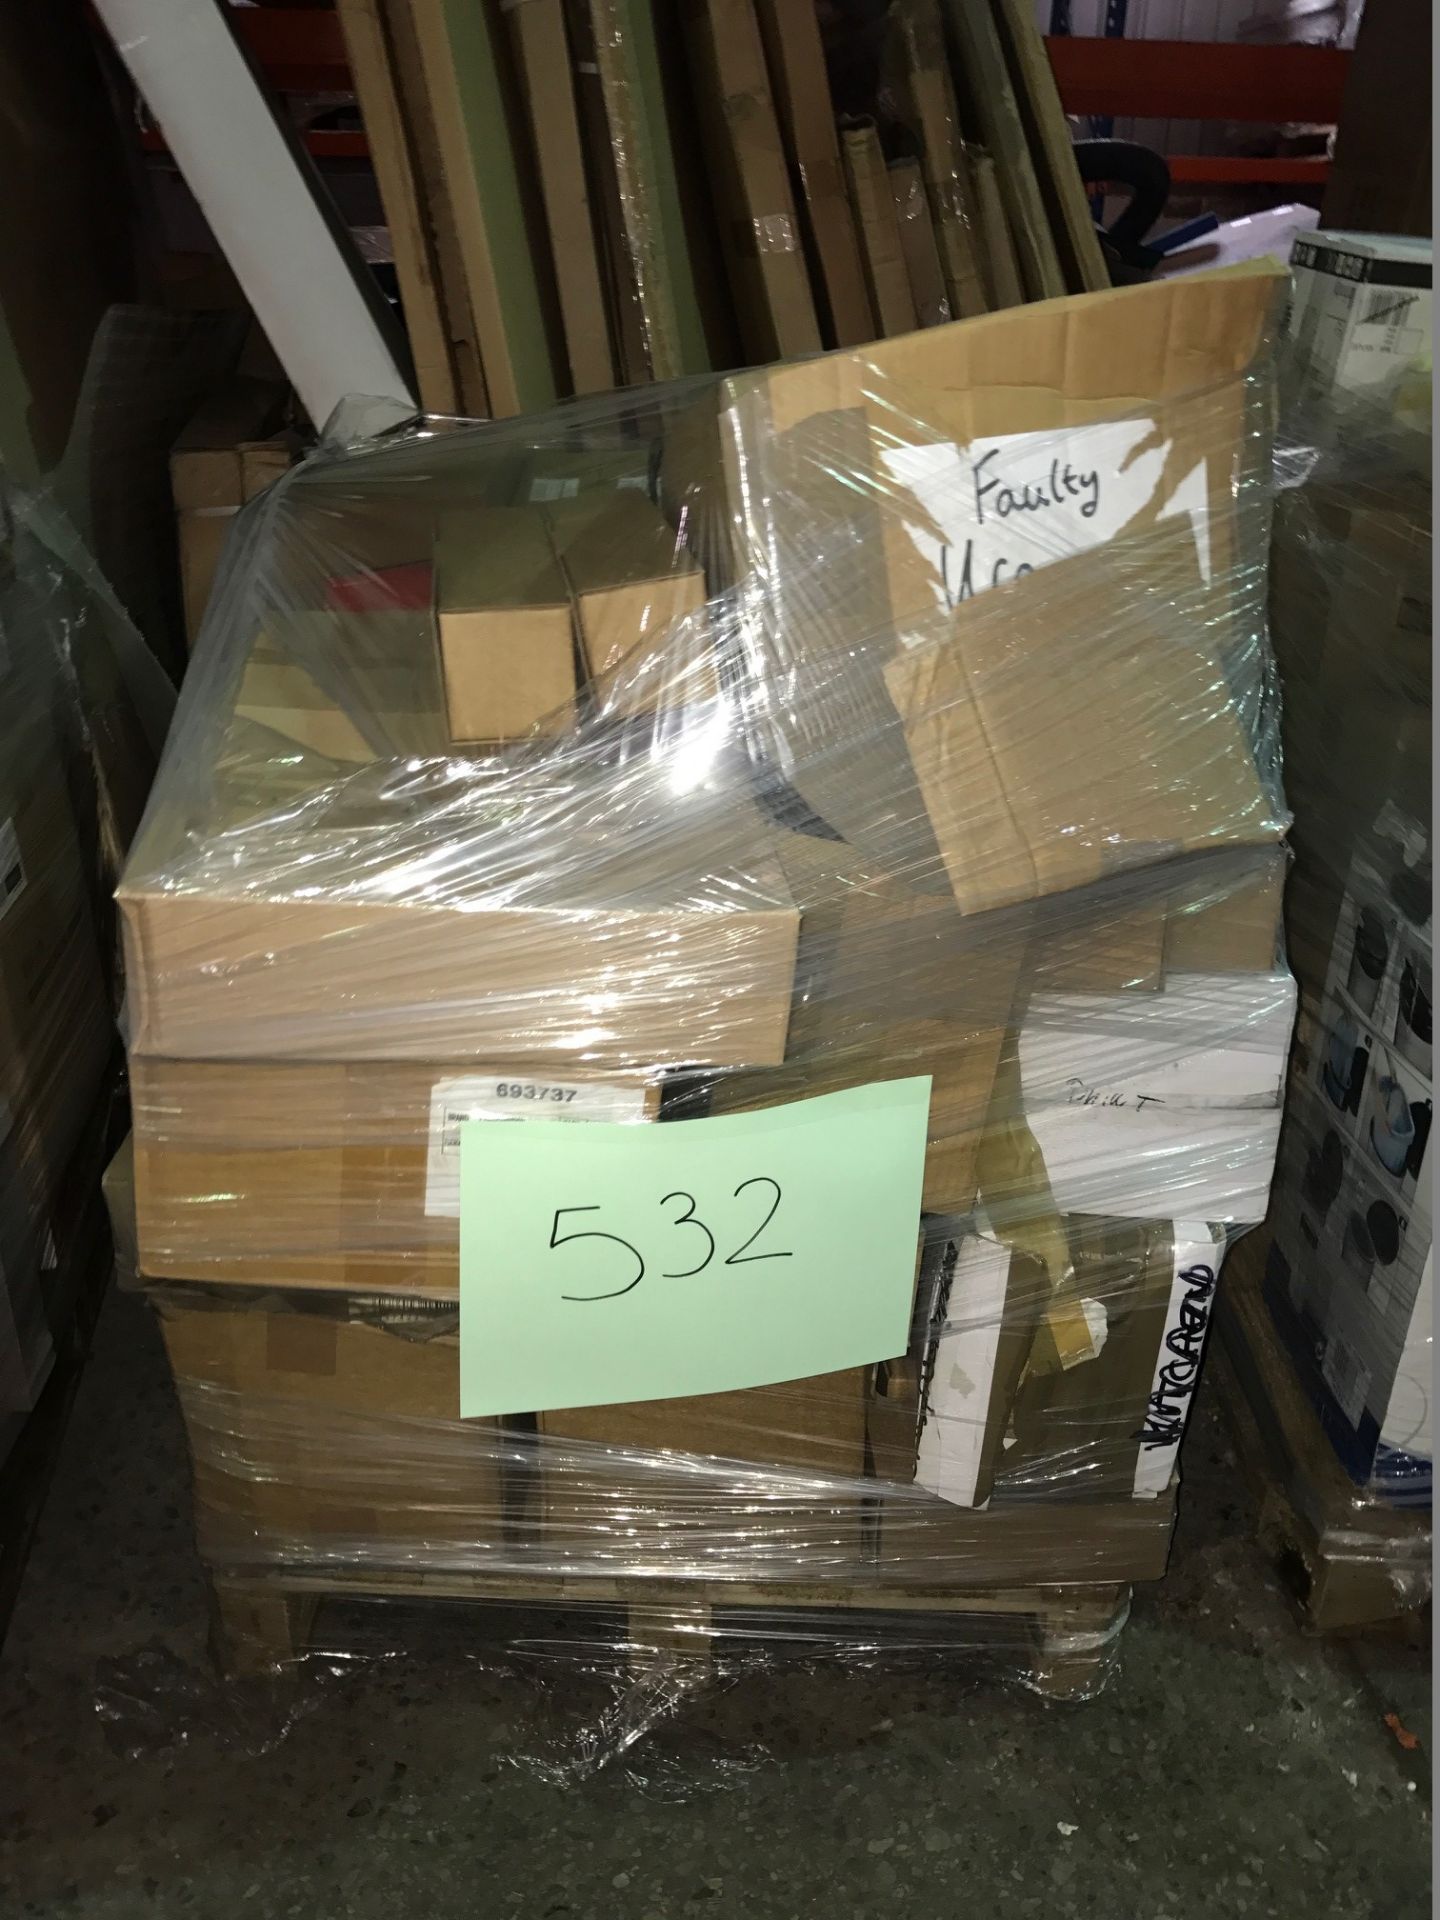 1 x Pallet of Mixed Stock/Stationery Including Wine Carriers, Ring Binders, Electricals & Various